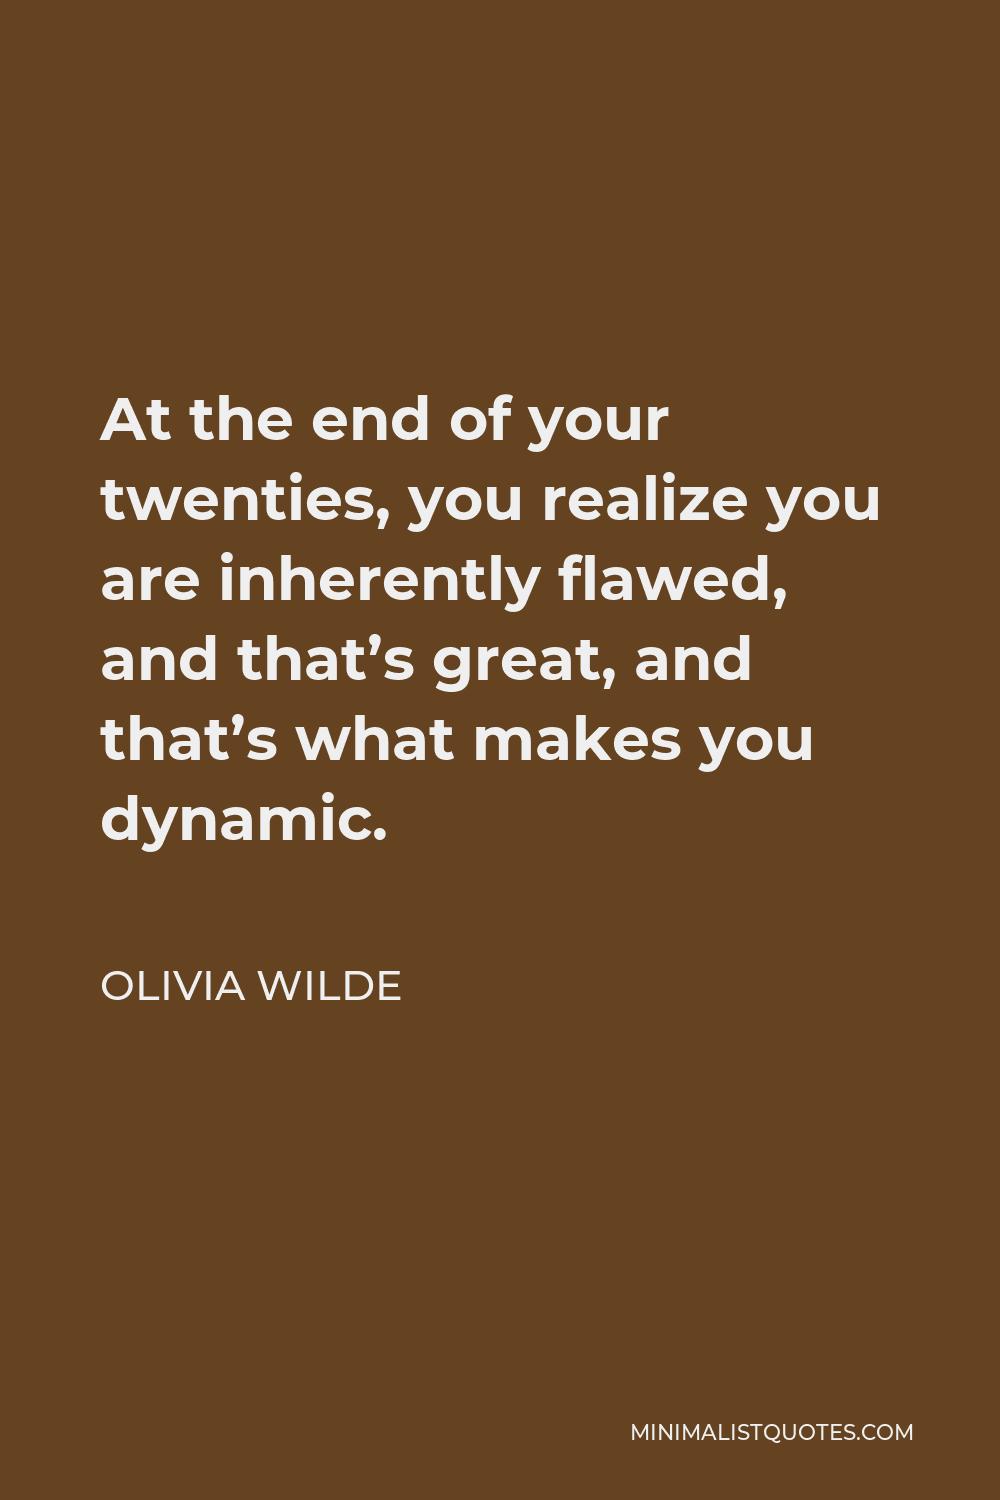 Olivia Wilde Quote - At the end of your twenties, you realize you are inherently flawed, and that’s great, and that’s what makes you dynamic.